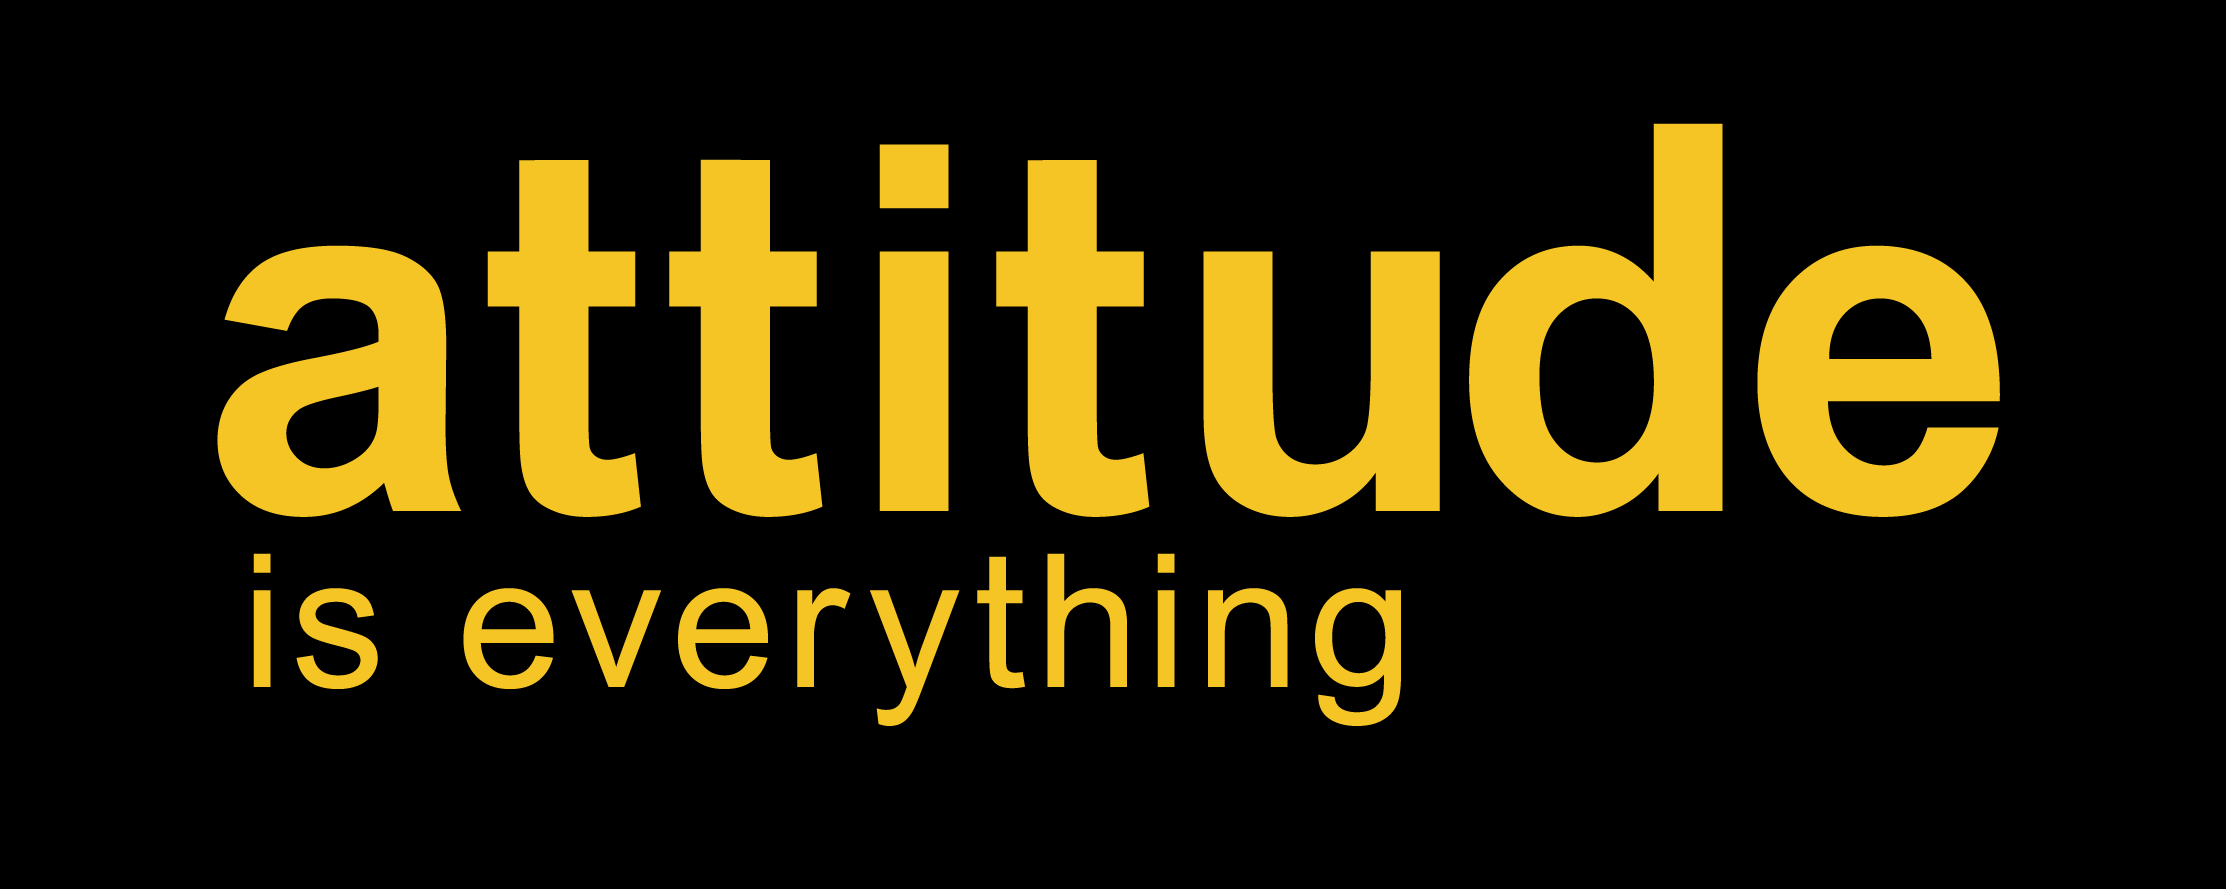 Attitude is Everything logo - The words Attitude is Everything in yellow on a black background